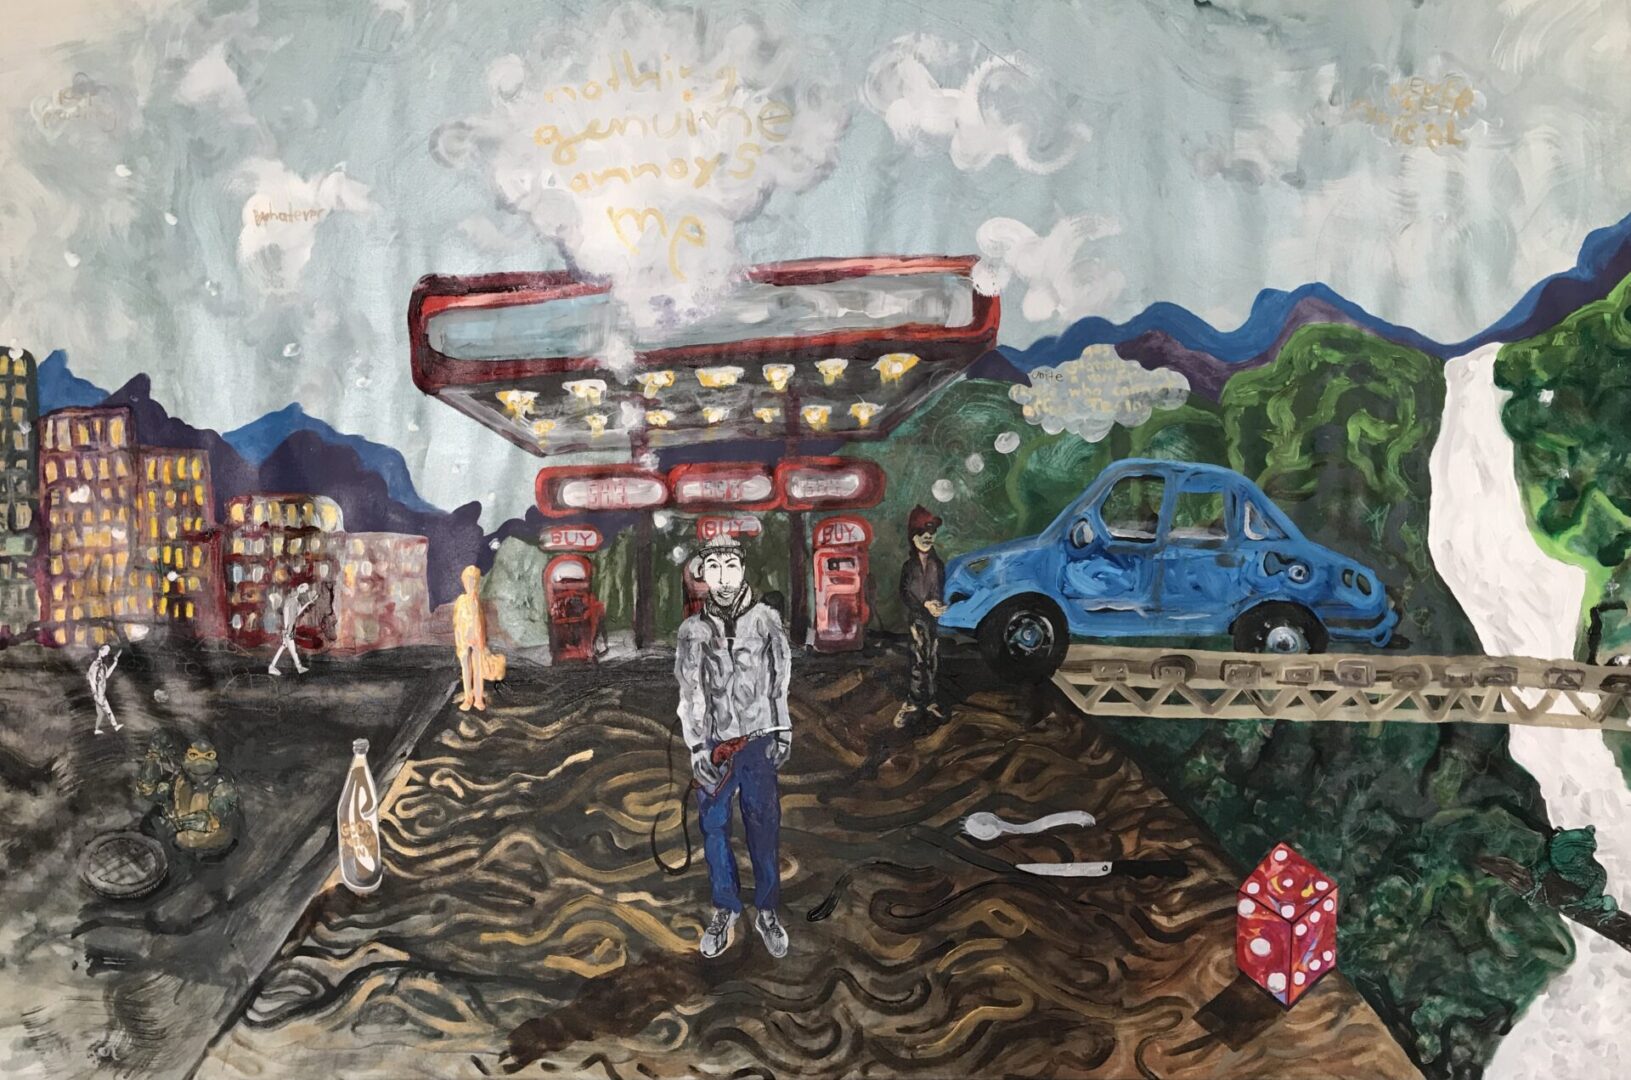 Oil painting of a gas station in the city